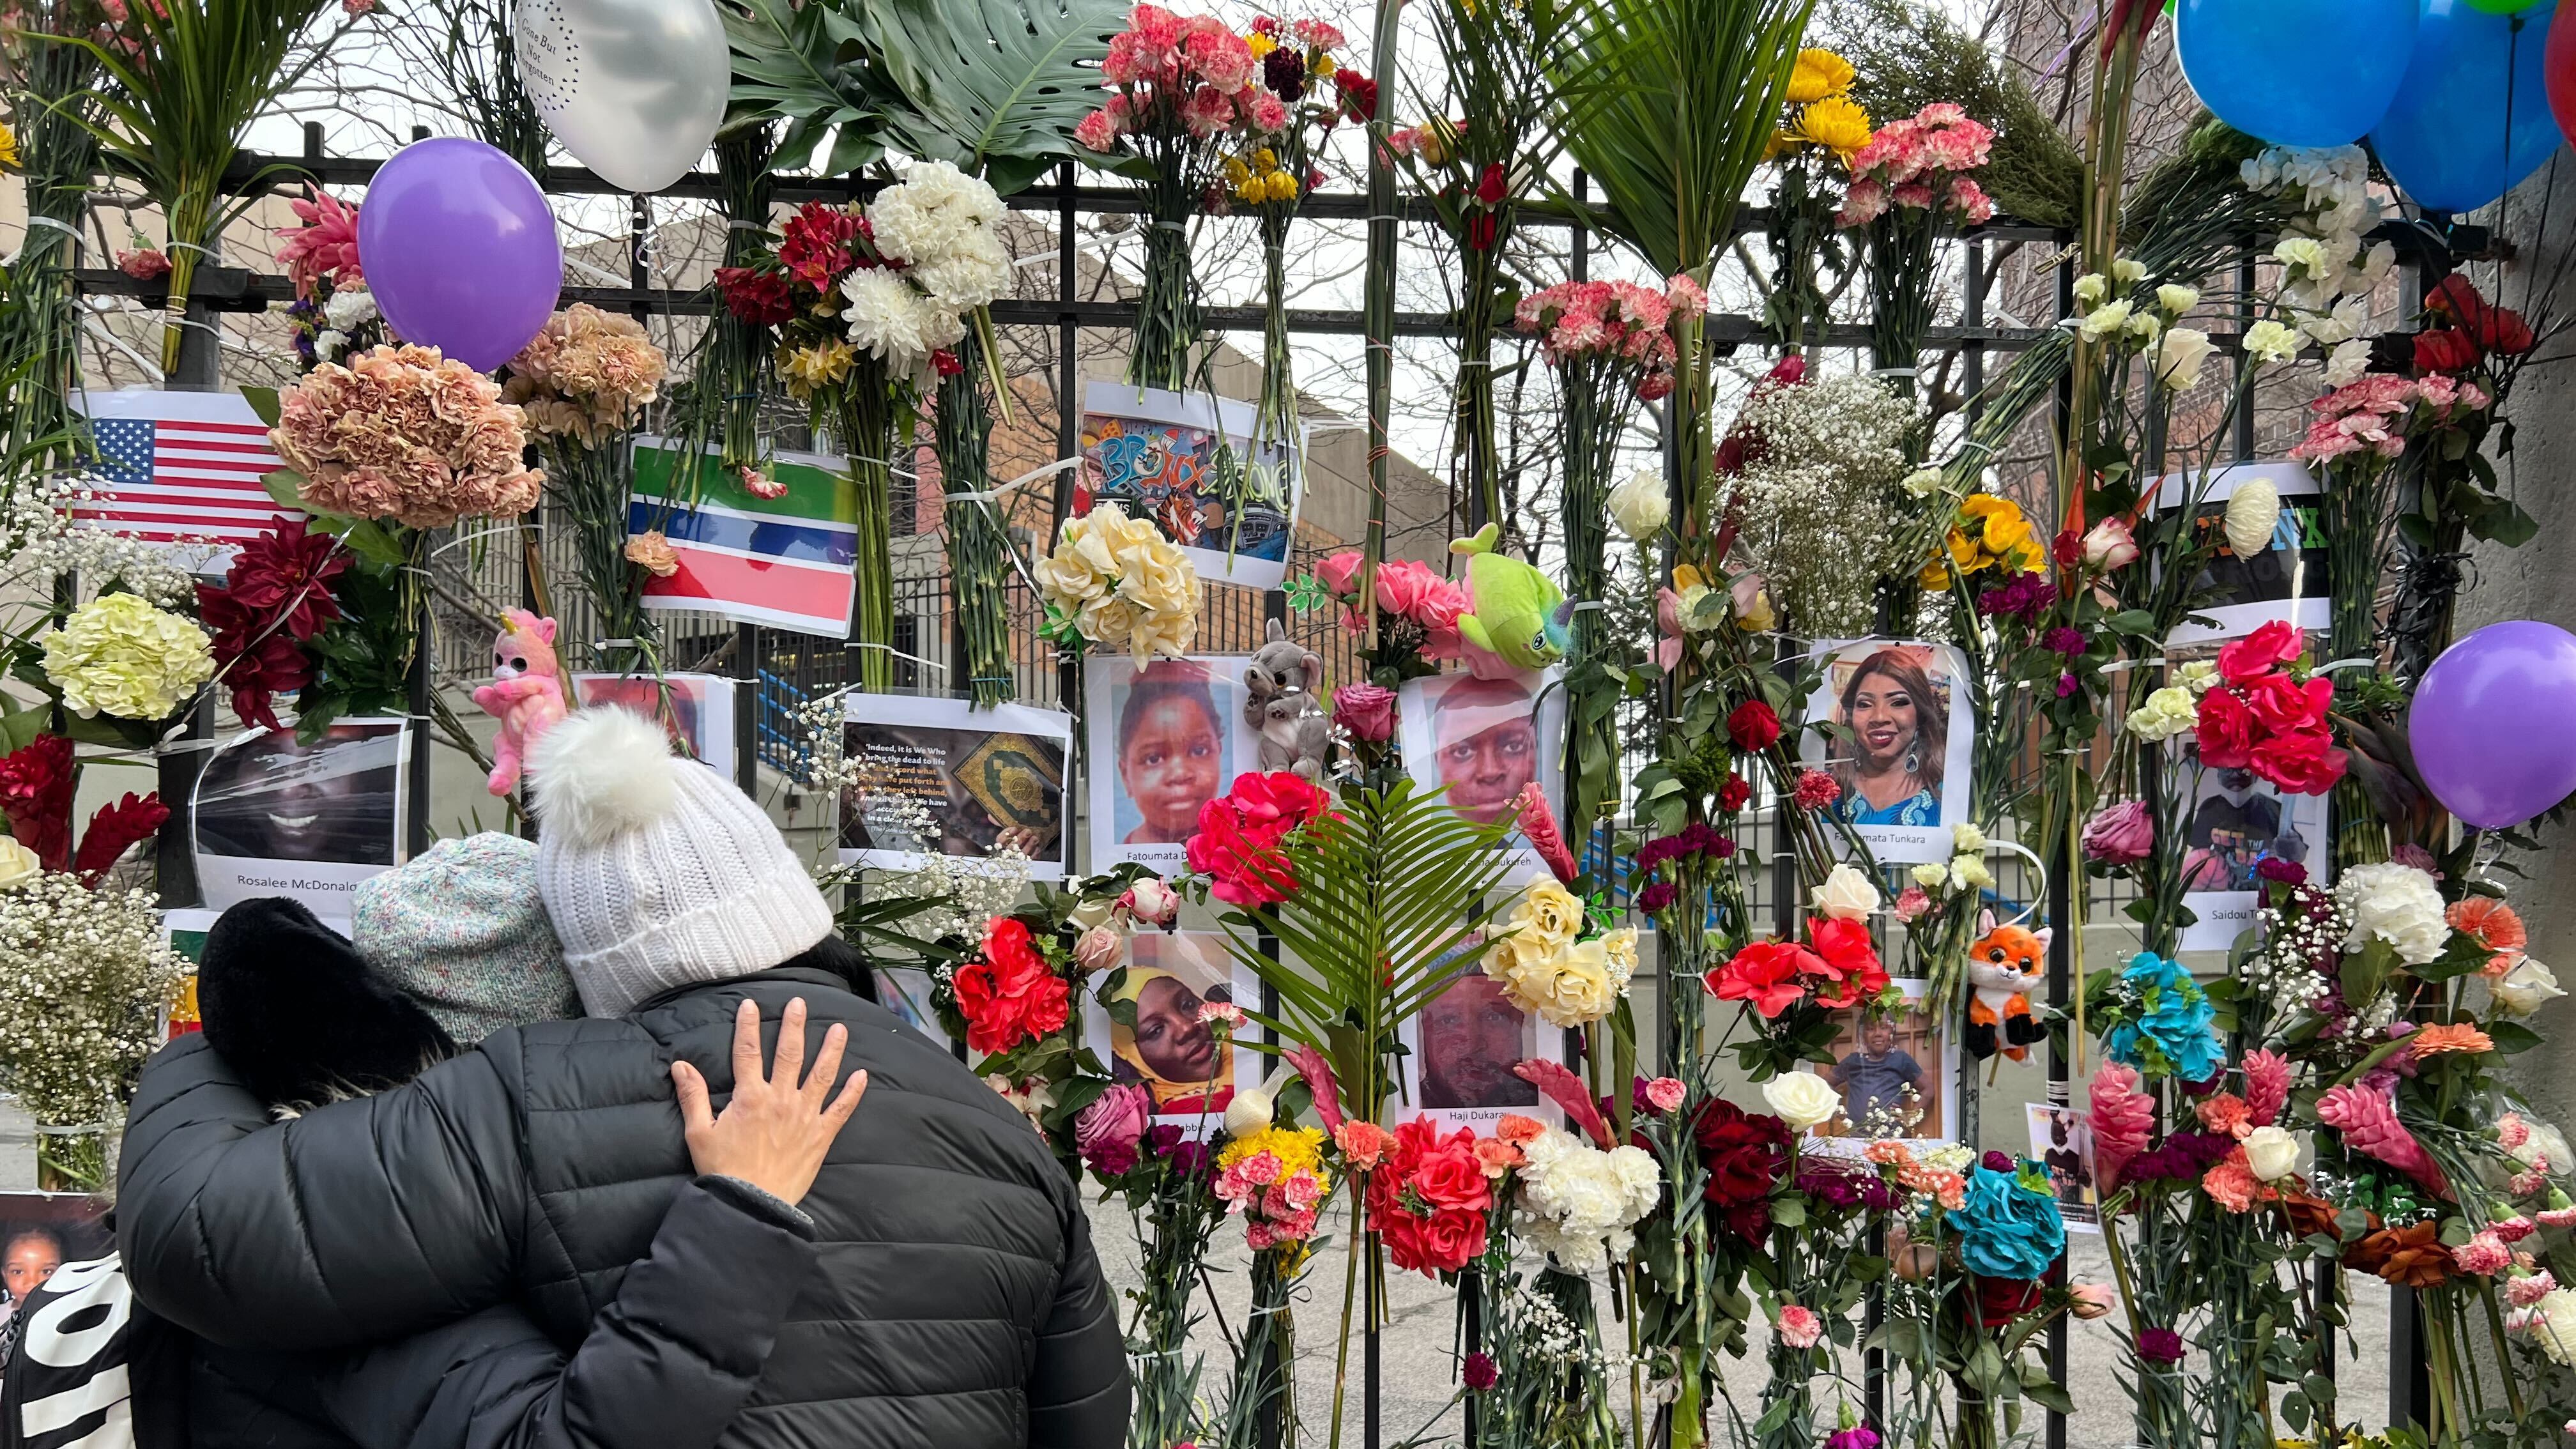 Two people in winter clothing embrace next to a memorial for the victims of a fatal fire in a Bronx apartment. The memorial is adorned with flowers, candles, and photographs of the victims.